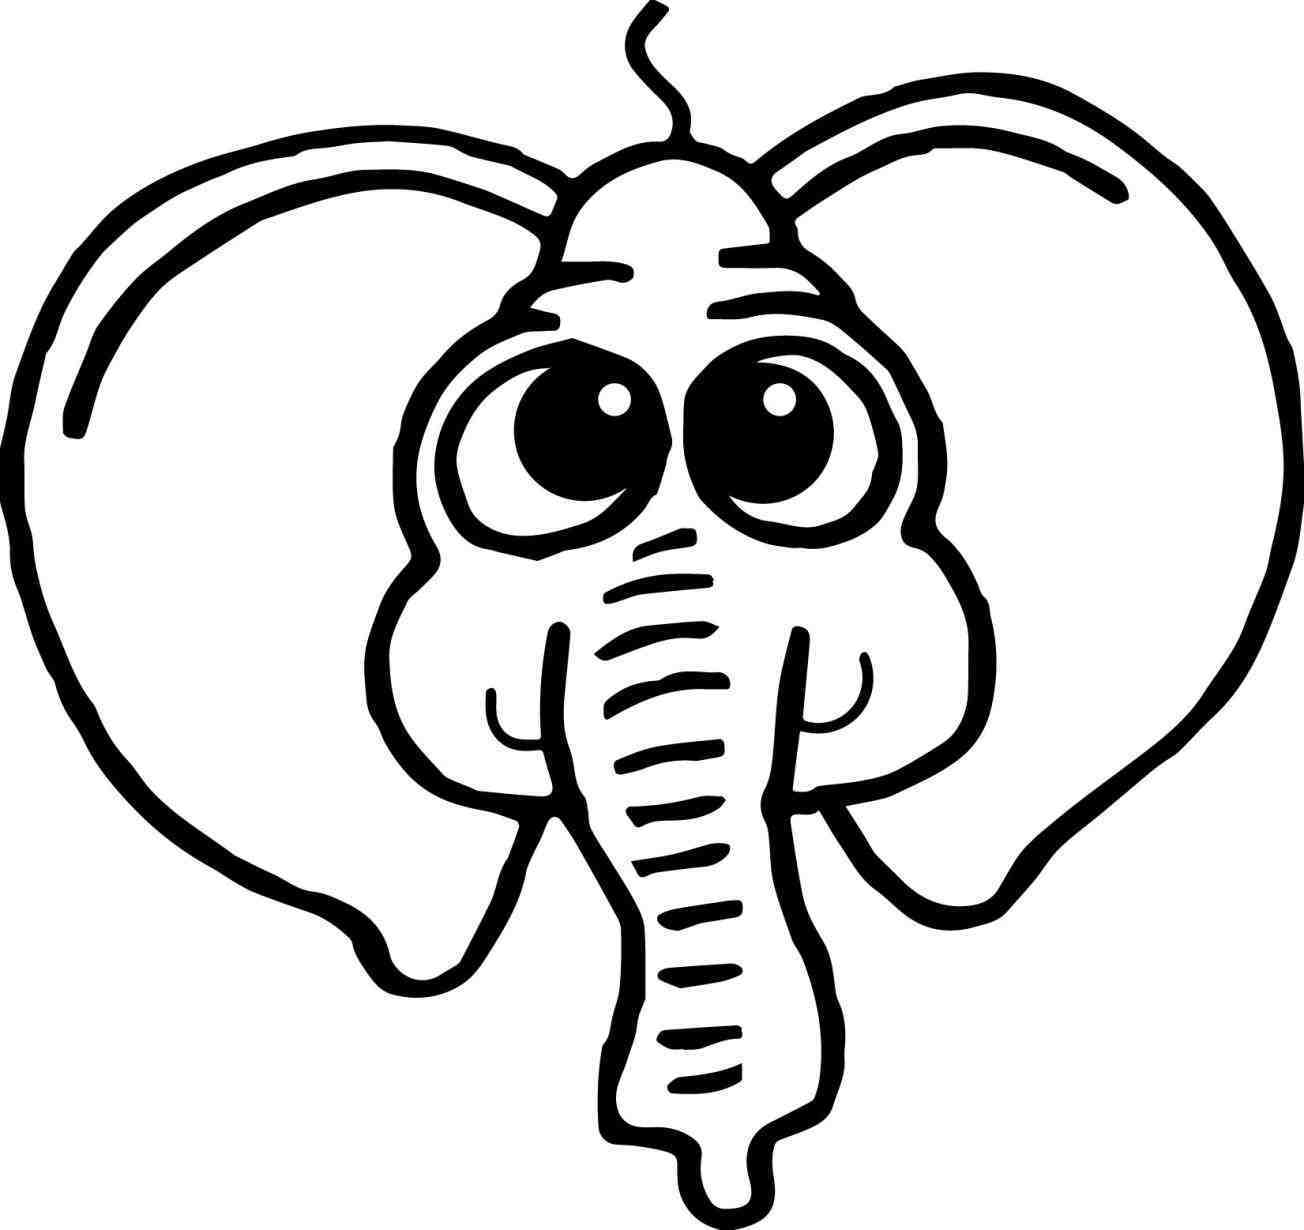 Elephant Face Coloring Pages at GetColorings.com | Free printable ...